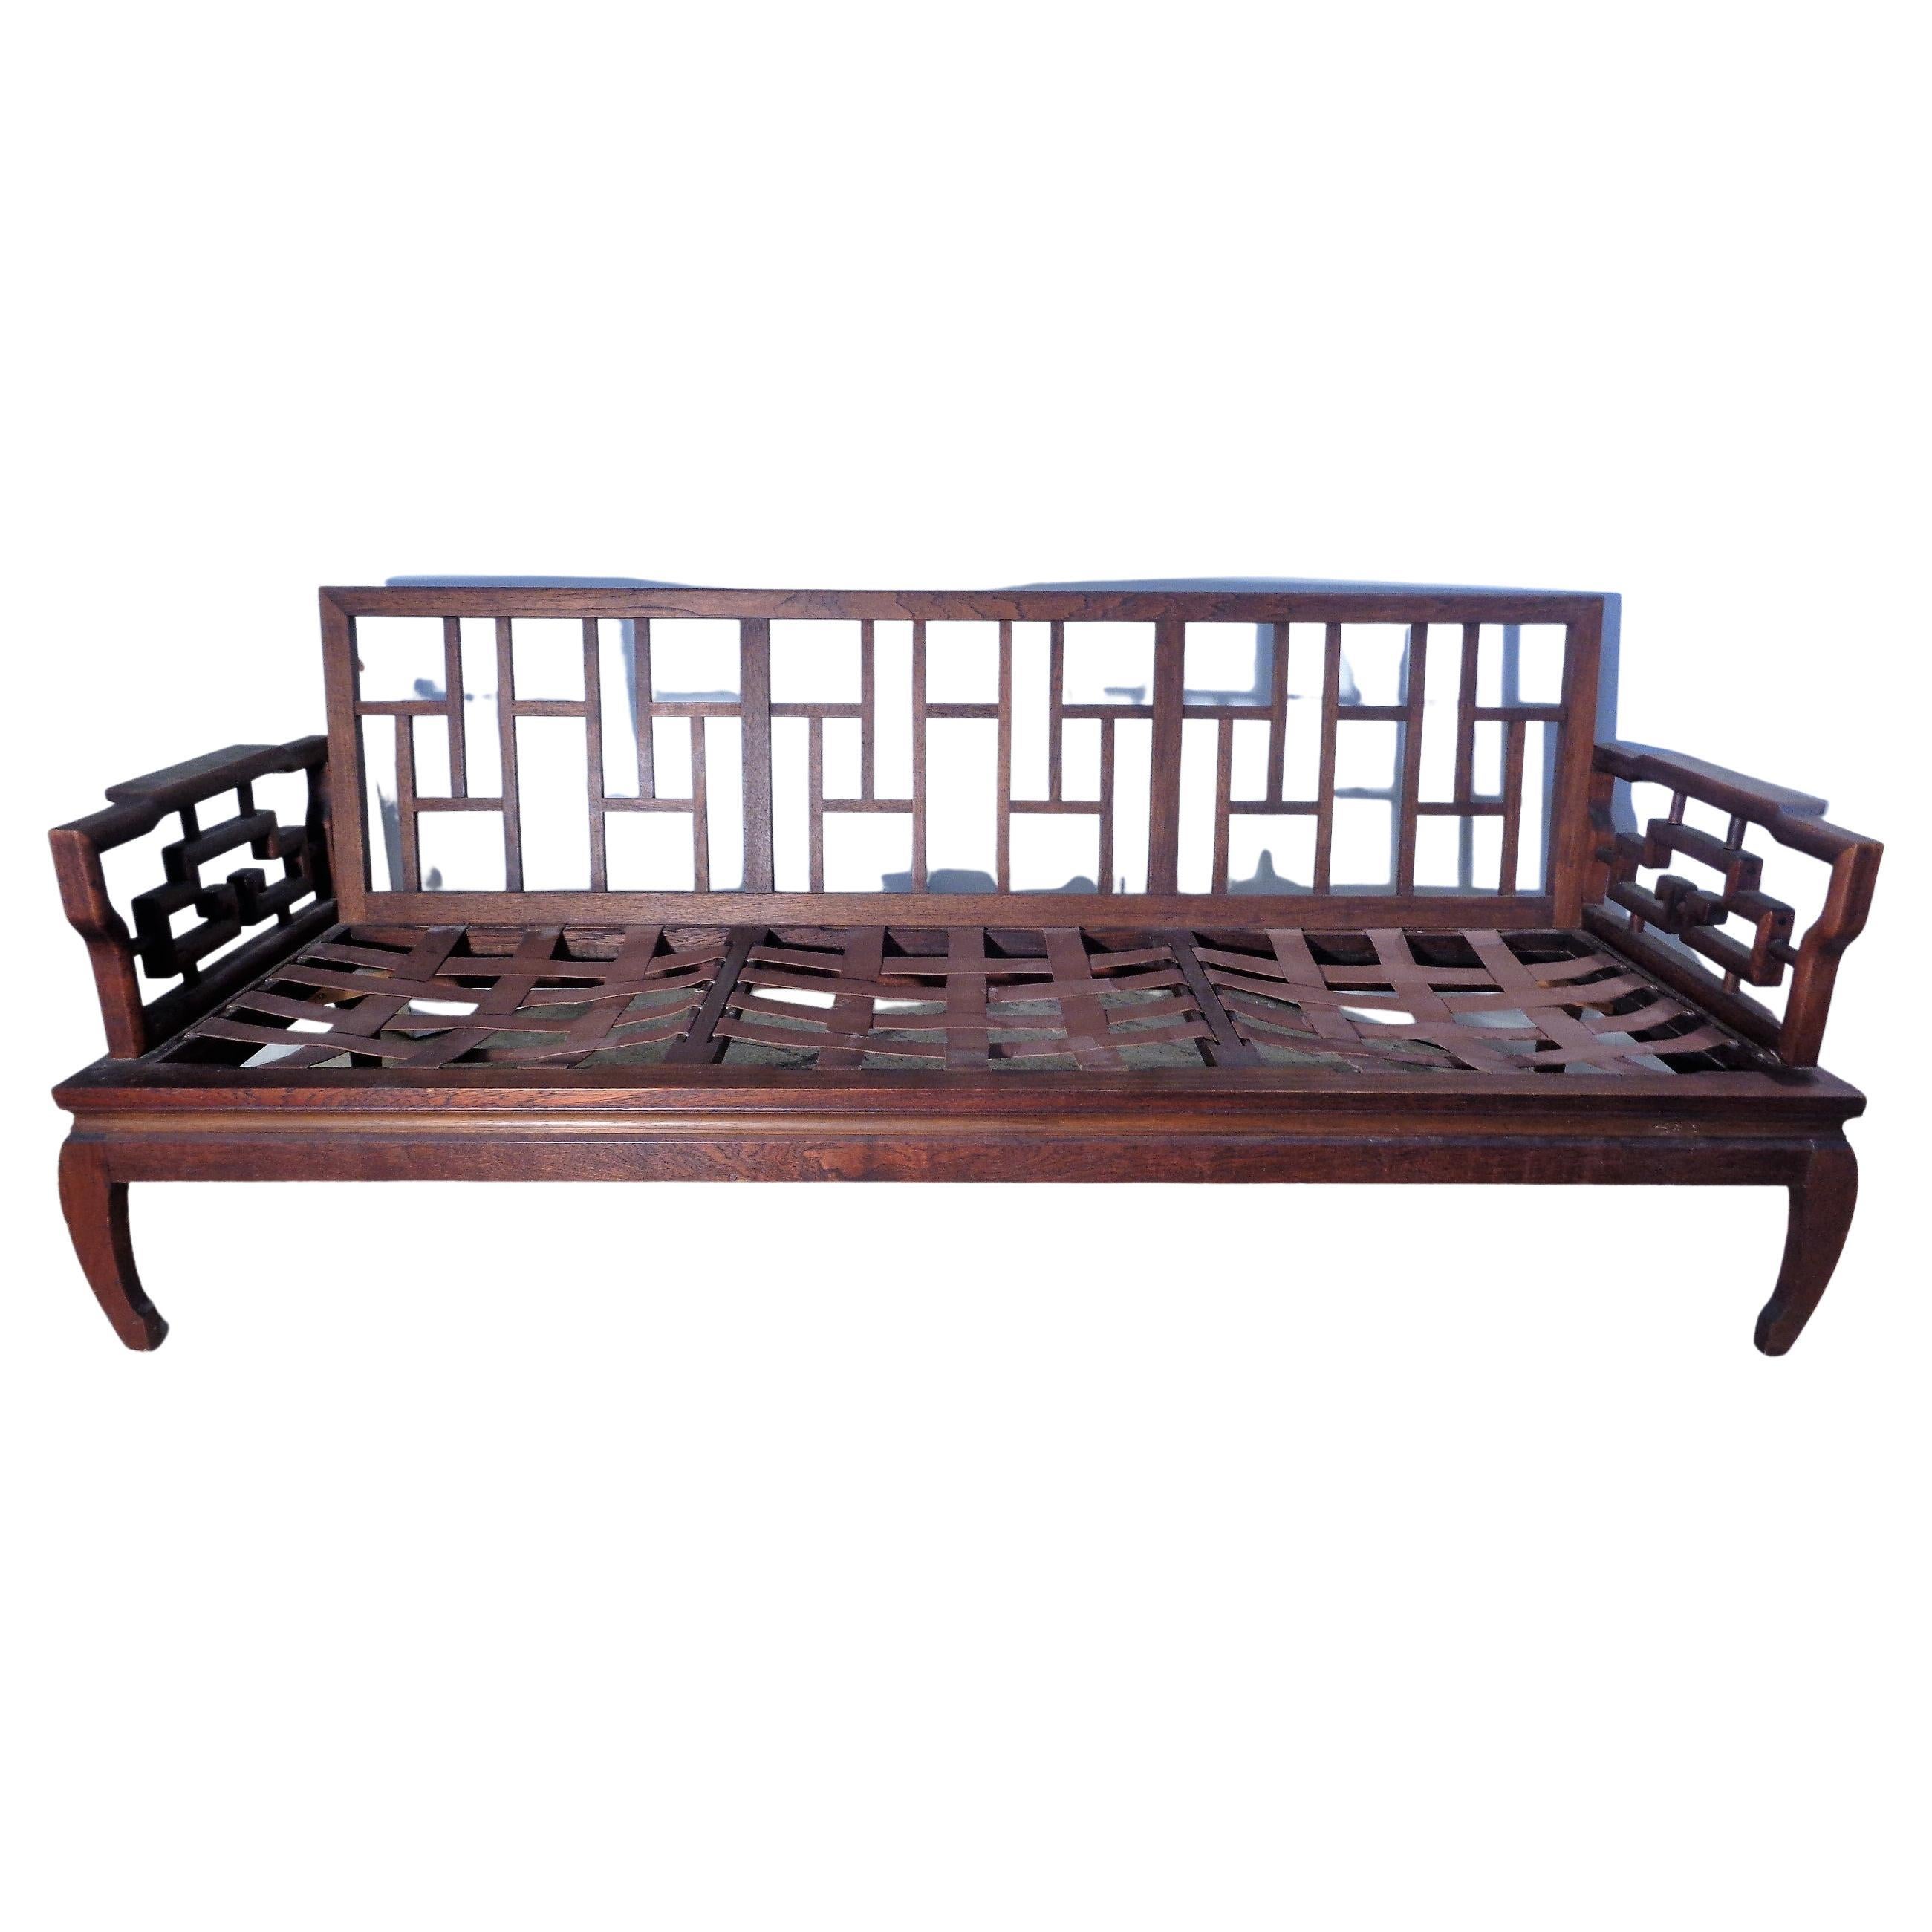 Very elegant Ming style mahogany  hardwood sofa settee in nicely aged original color w/ beautifully figured grain to wood. Fine hand crafted hand carved details and pegged woodwork construction. Purchased by a missionary living in Singapore and